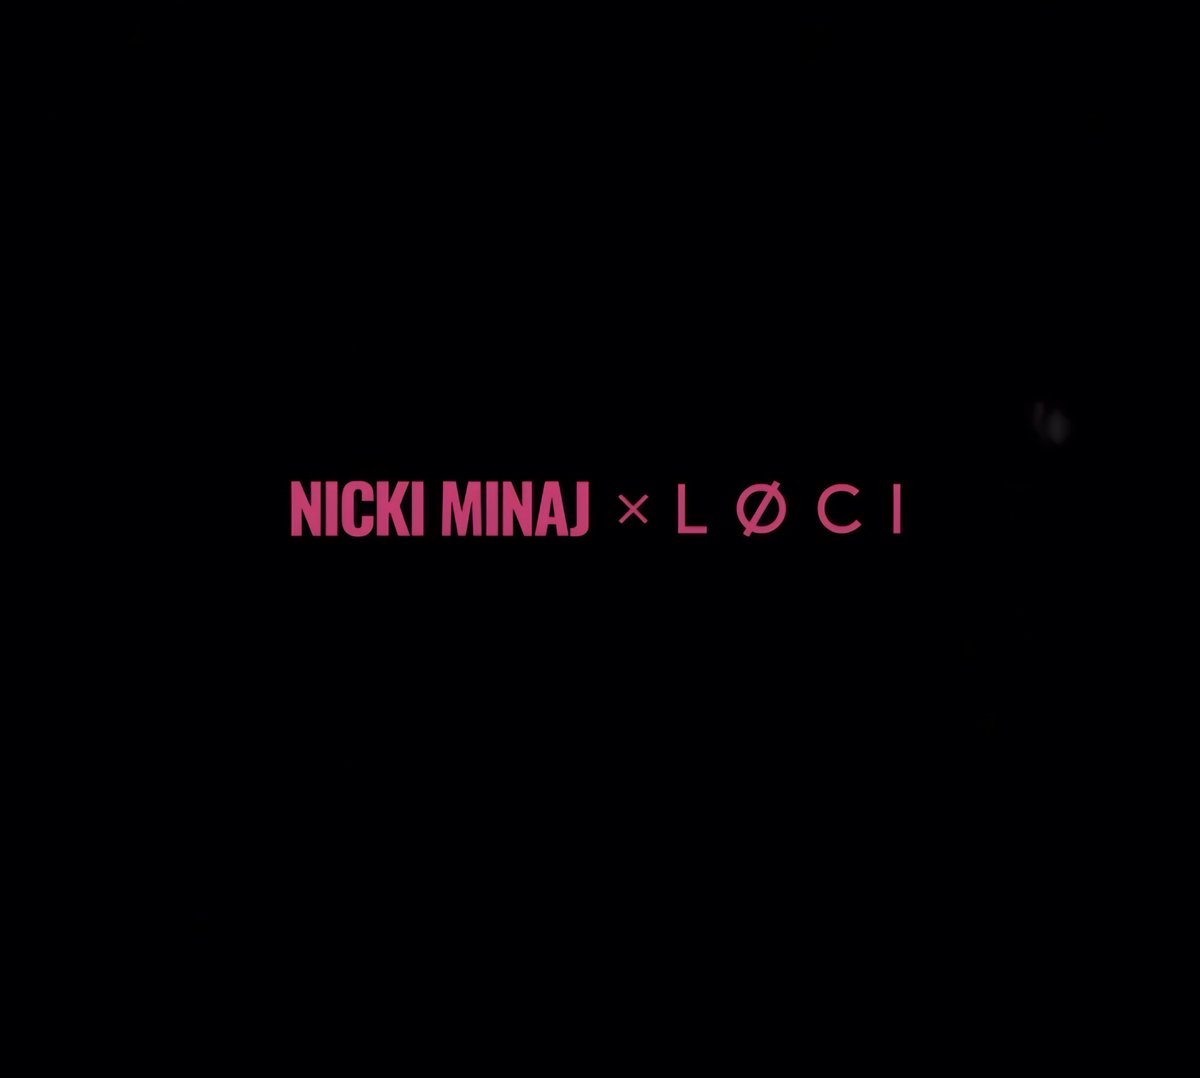 It's almost time! If you see this, reply #NickixLØCI